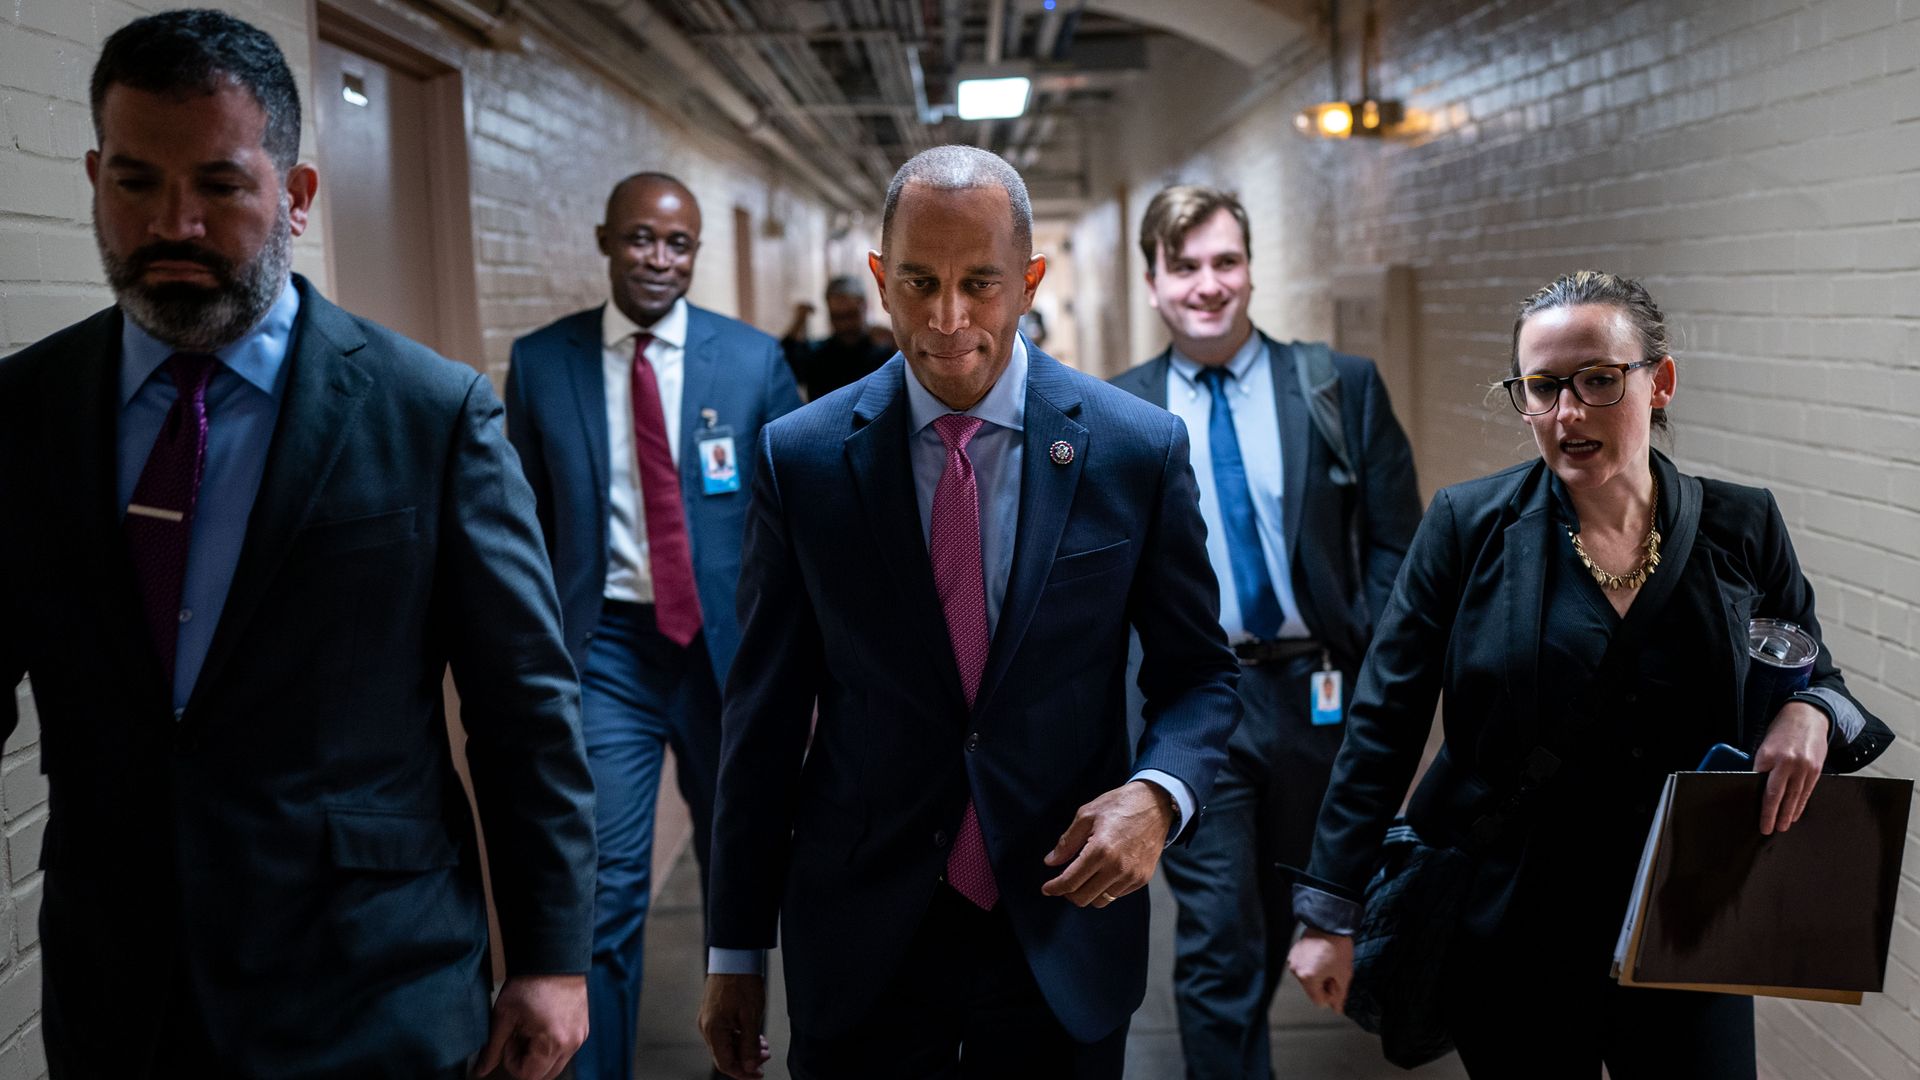 Rep. Hakeem Jeffries, wearing a blue suit jacket, light blue shirt and red tie, walks in a Capitol basement hallway flanked by staff and security.